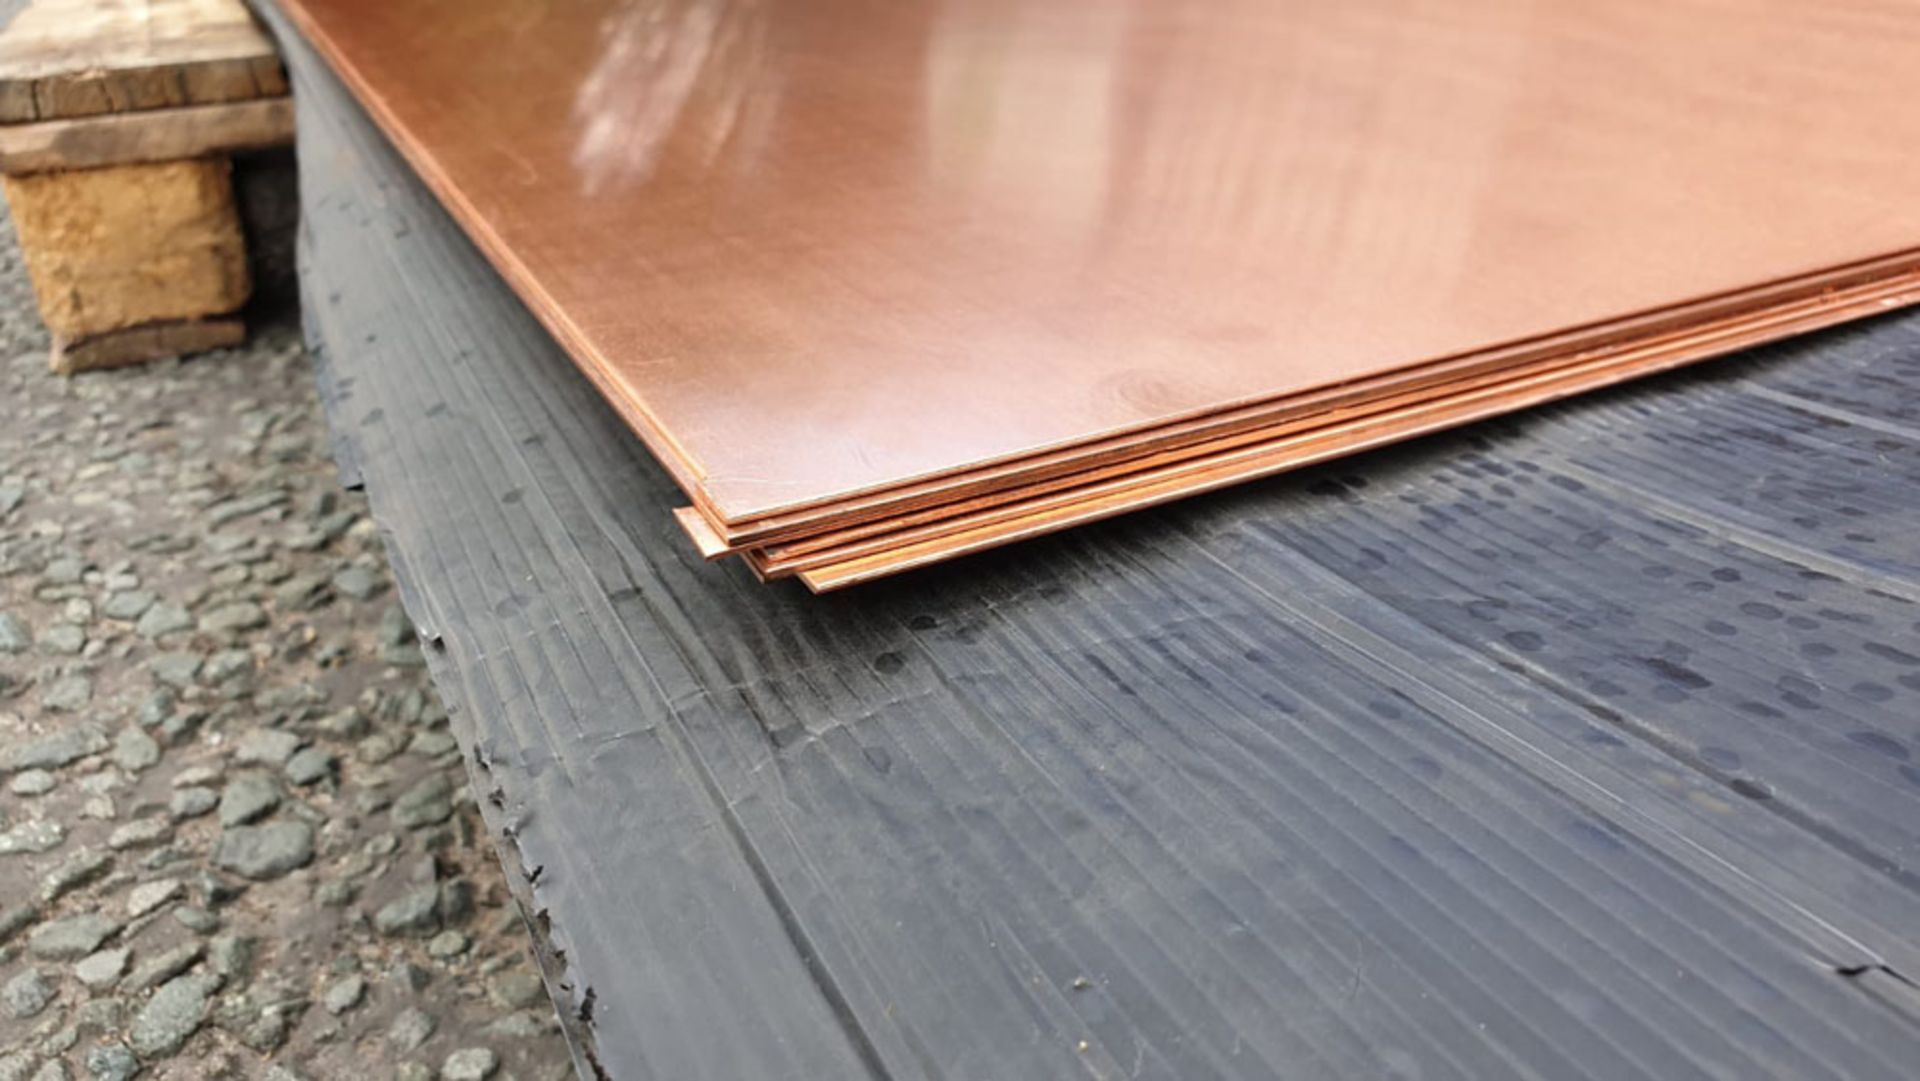 7 x Copper Sheet. Approx Size 2440mm x 555mm x 1.2mm. - Image 5 of 6